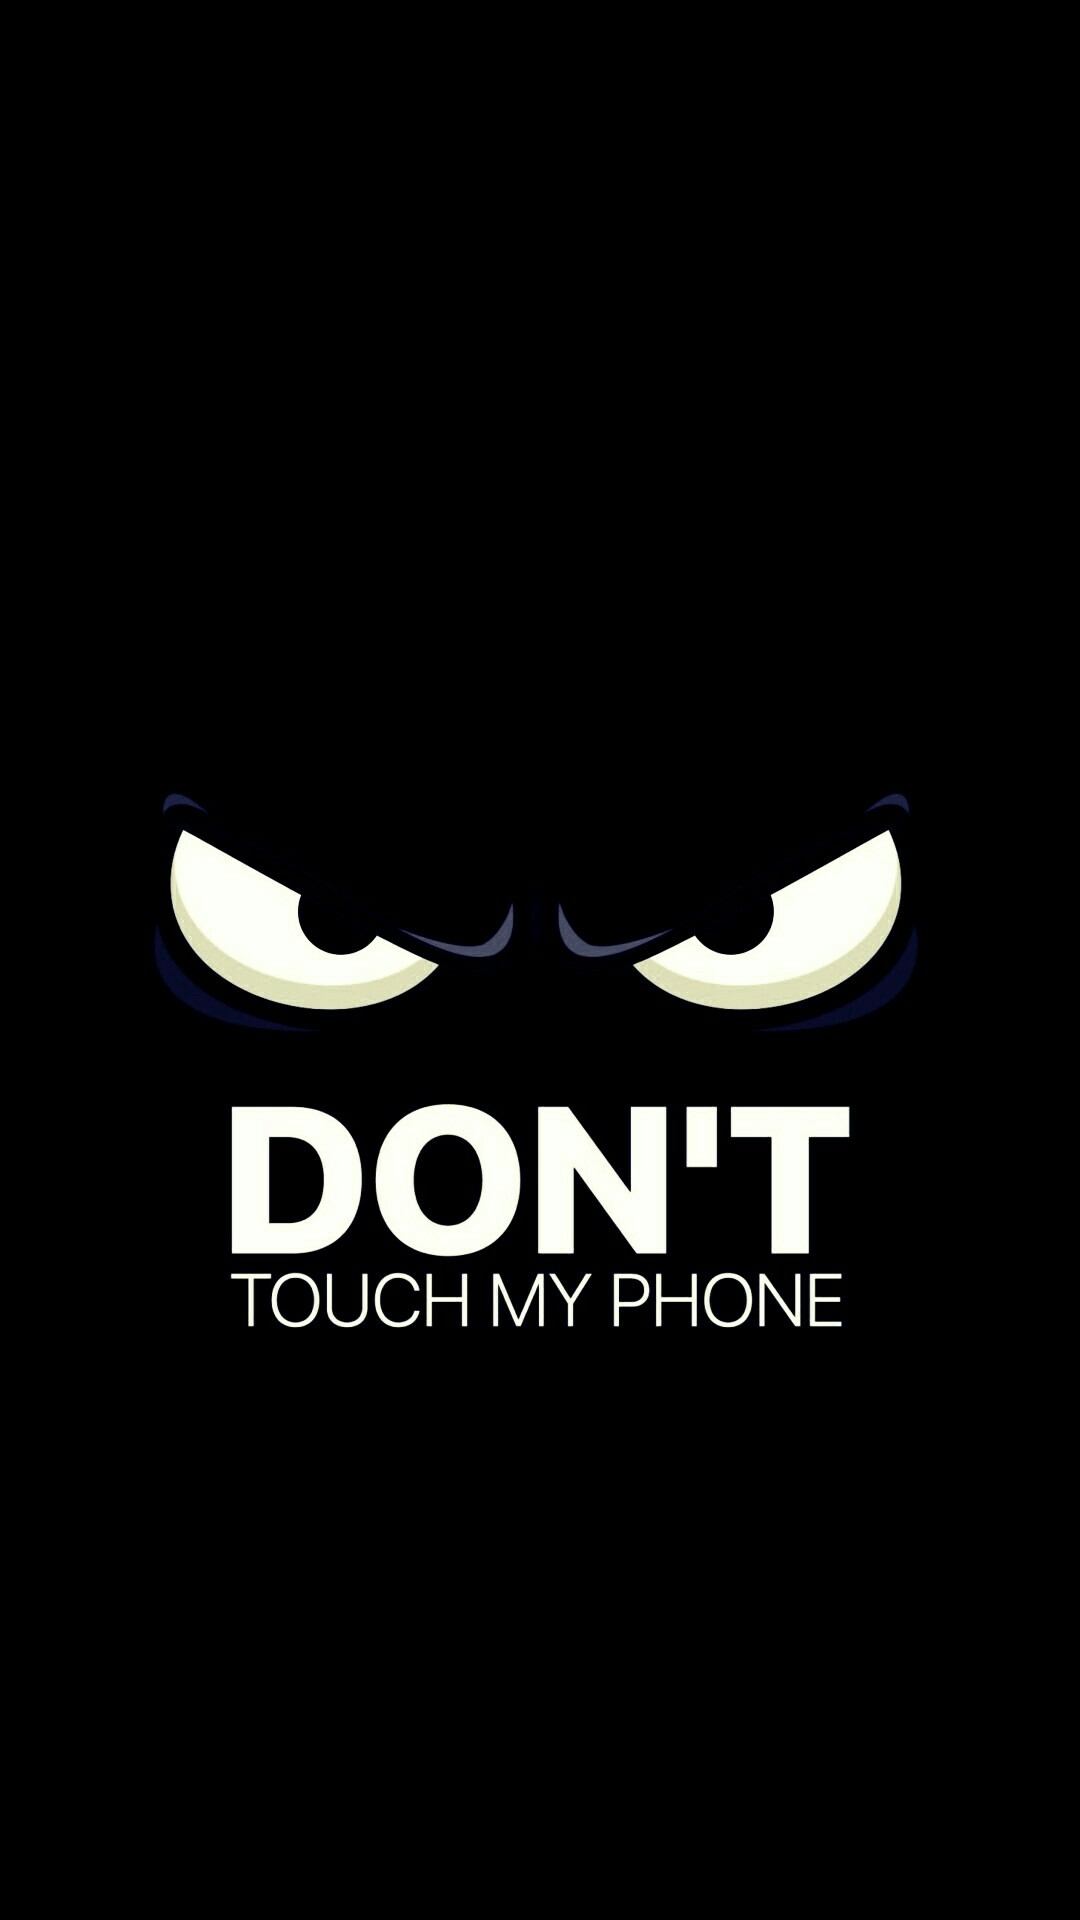 10 Latest Dont Touch My Phone Wallpaper FULL HD 1920×1080 For PC Background